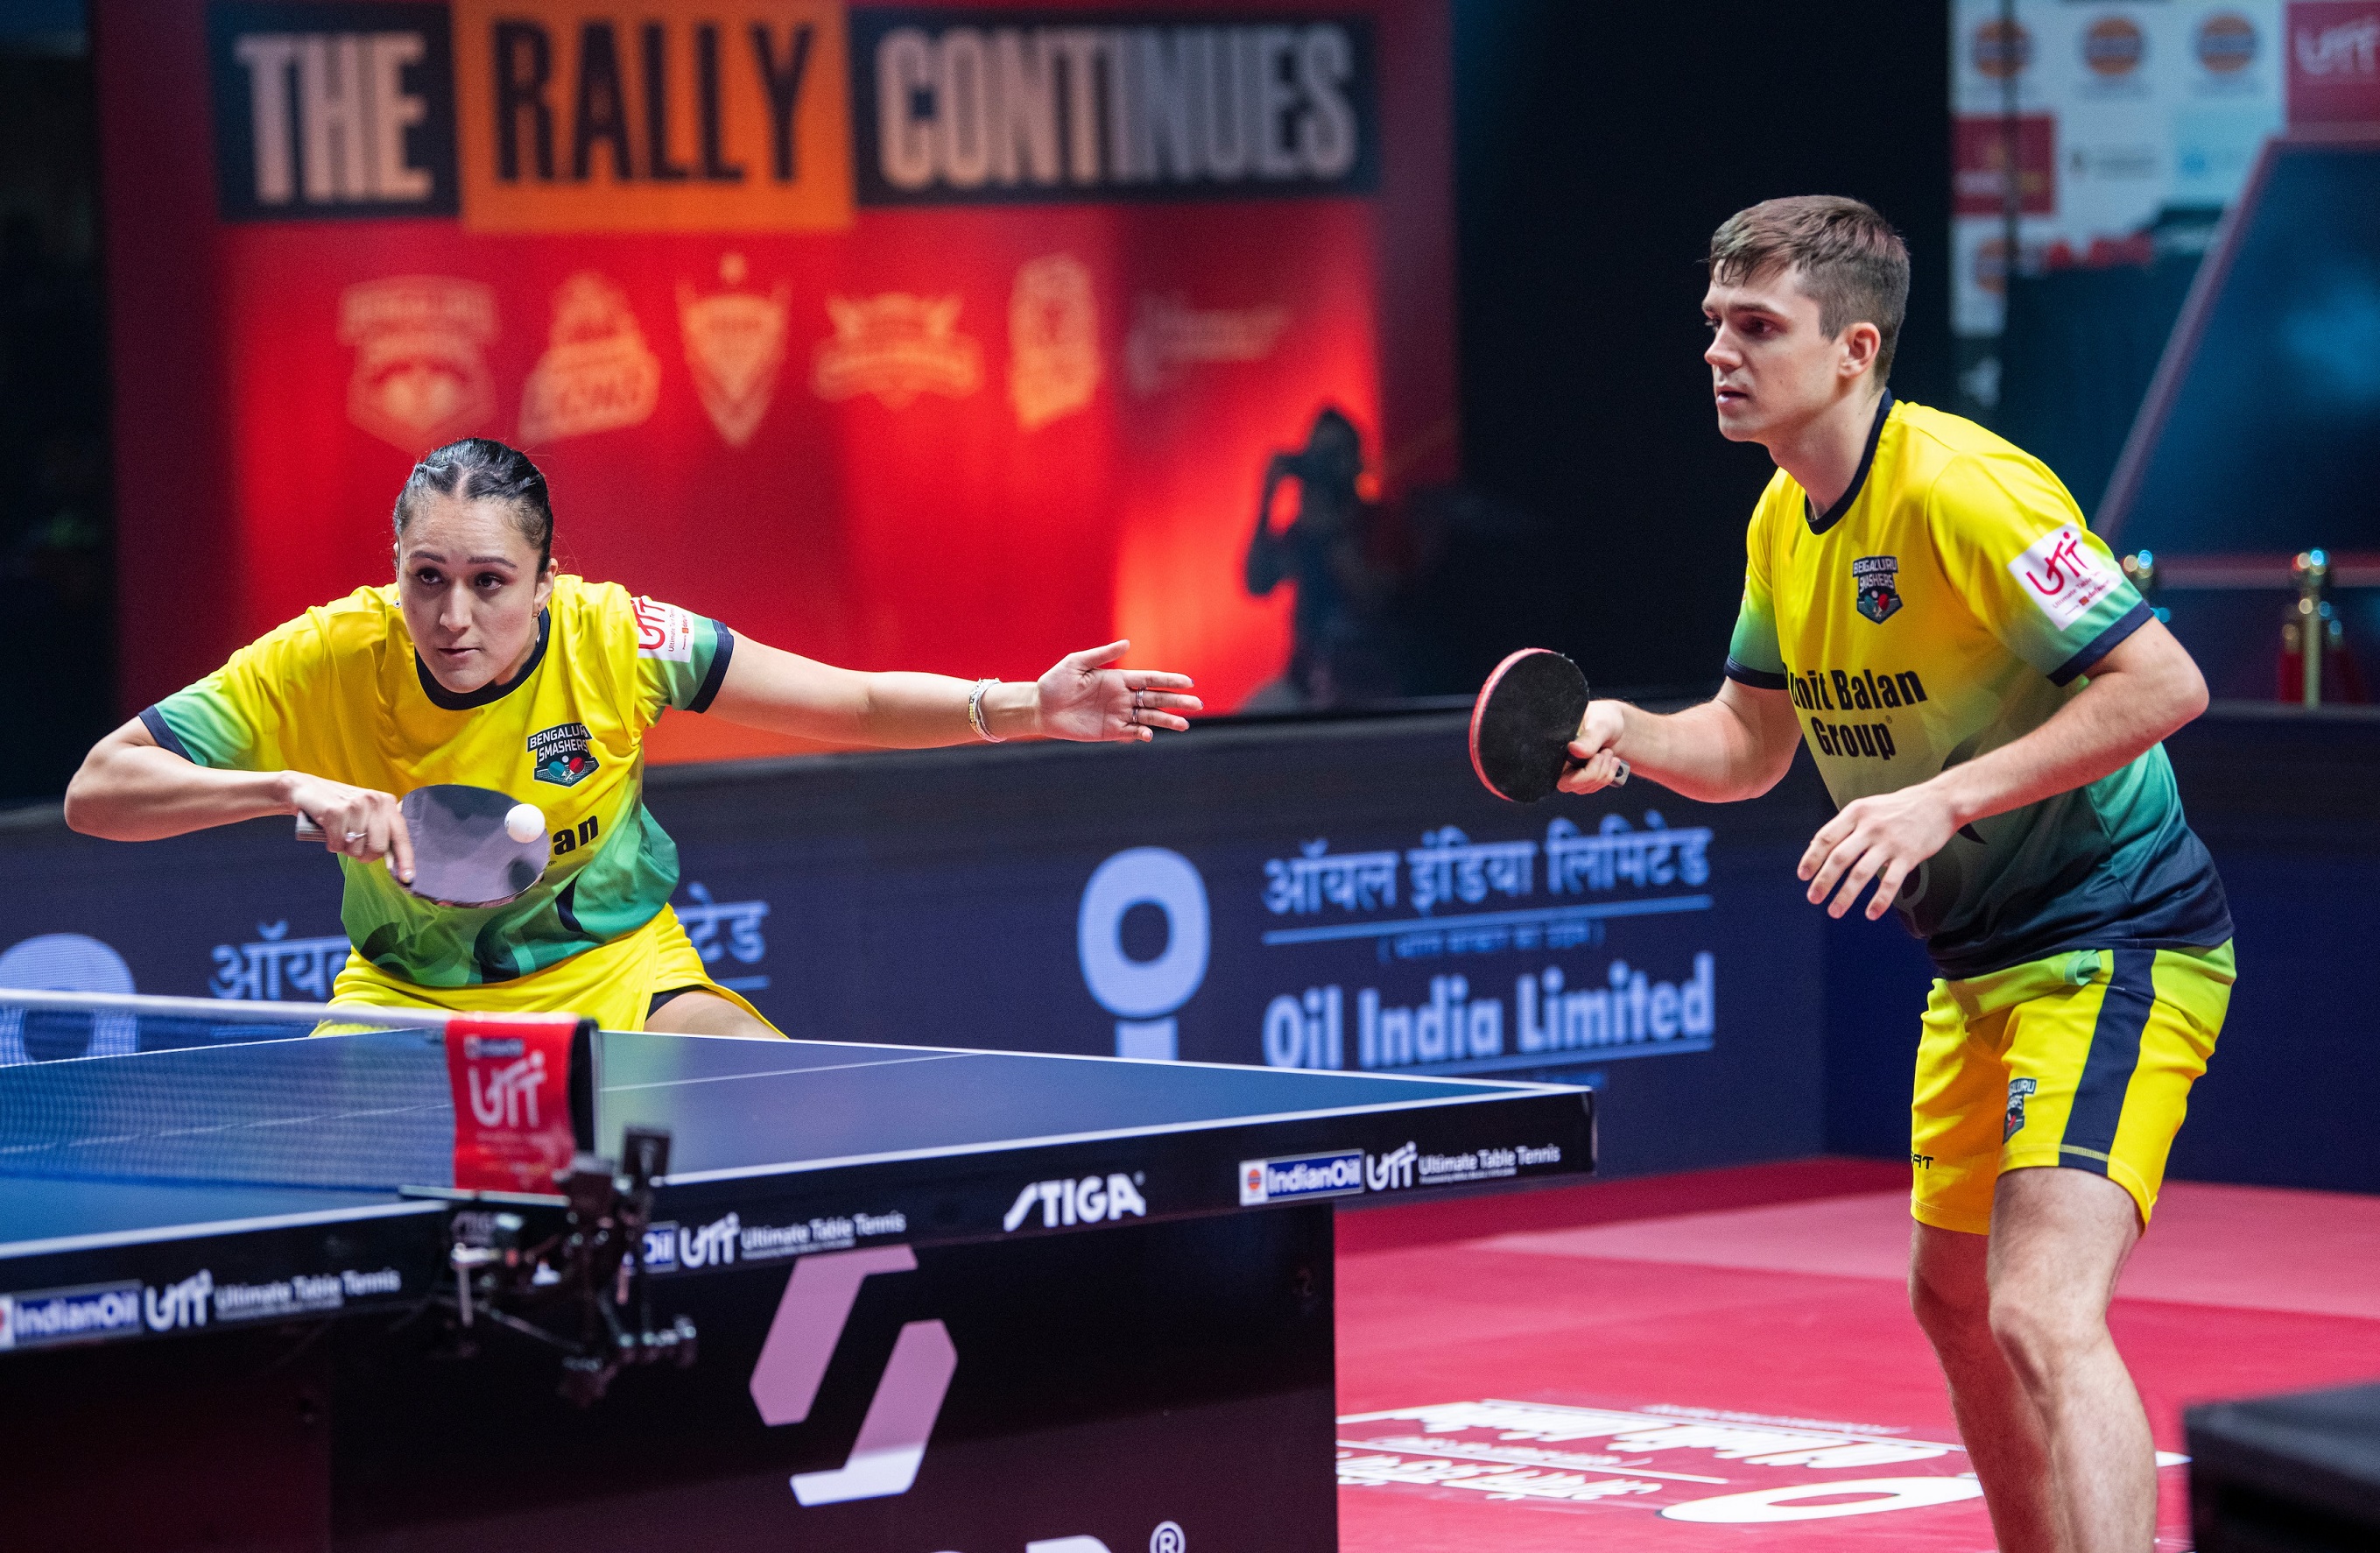 Manika Batra and Kirill Gerassimenko of Bengaluru Smashers in action during the mixed doubles match of the Ultimate Table Tennis tie in Pune on Tuesday.